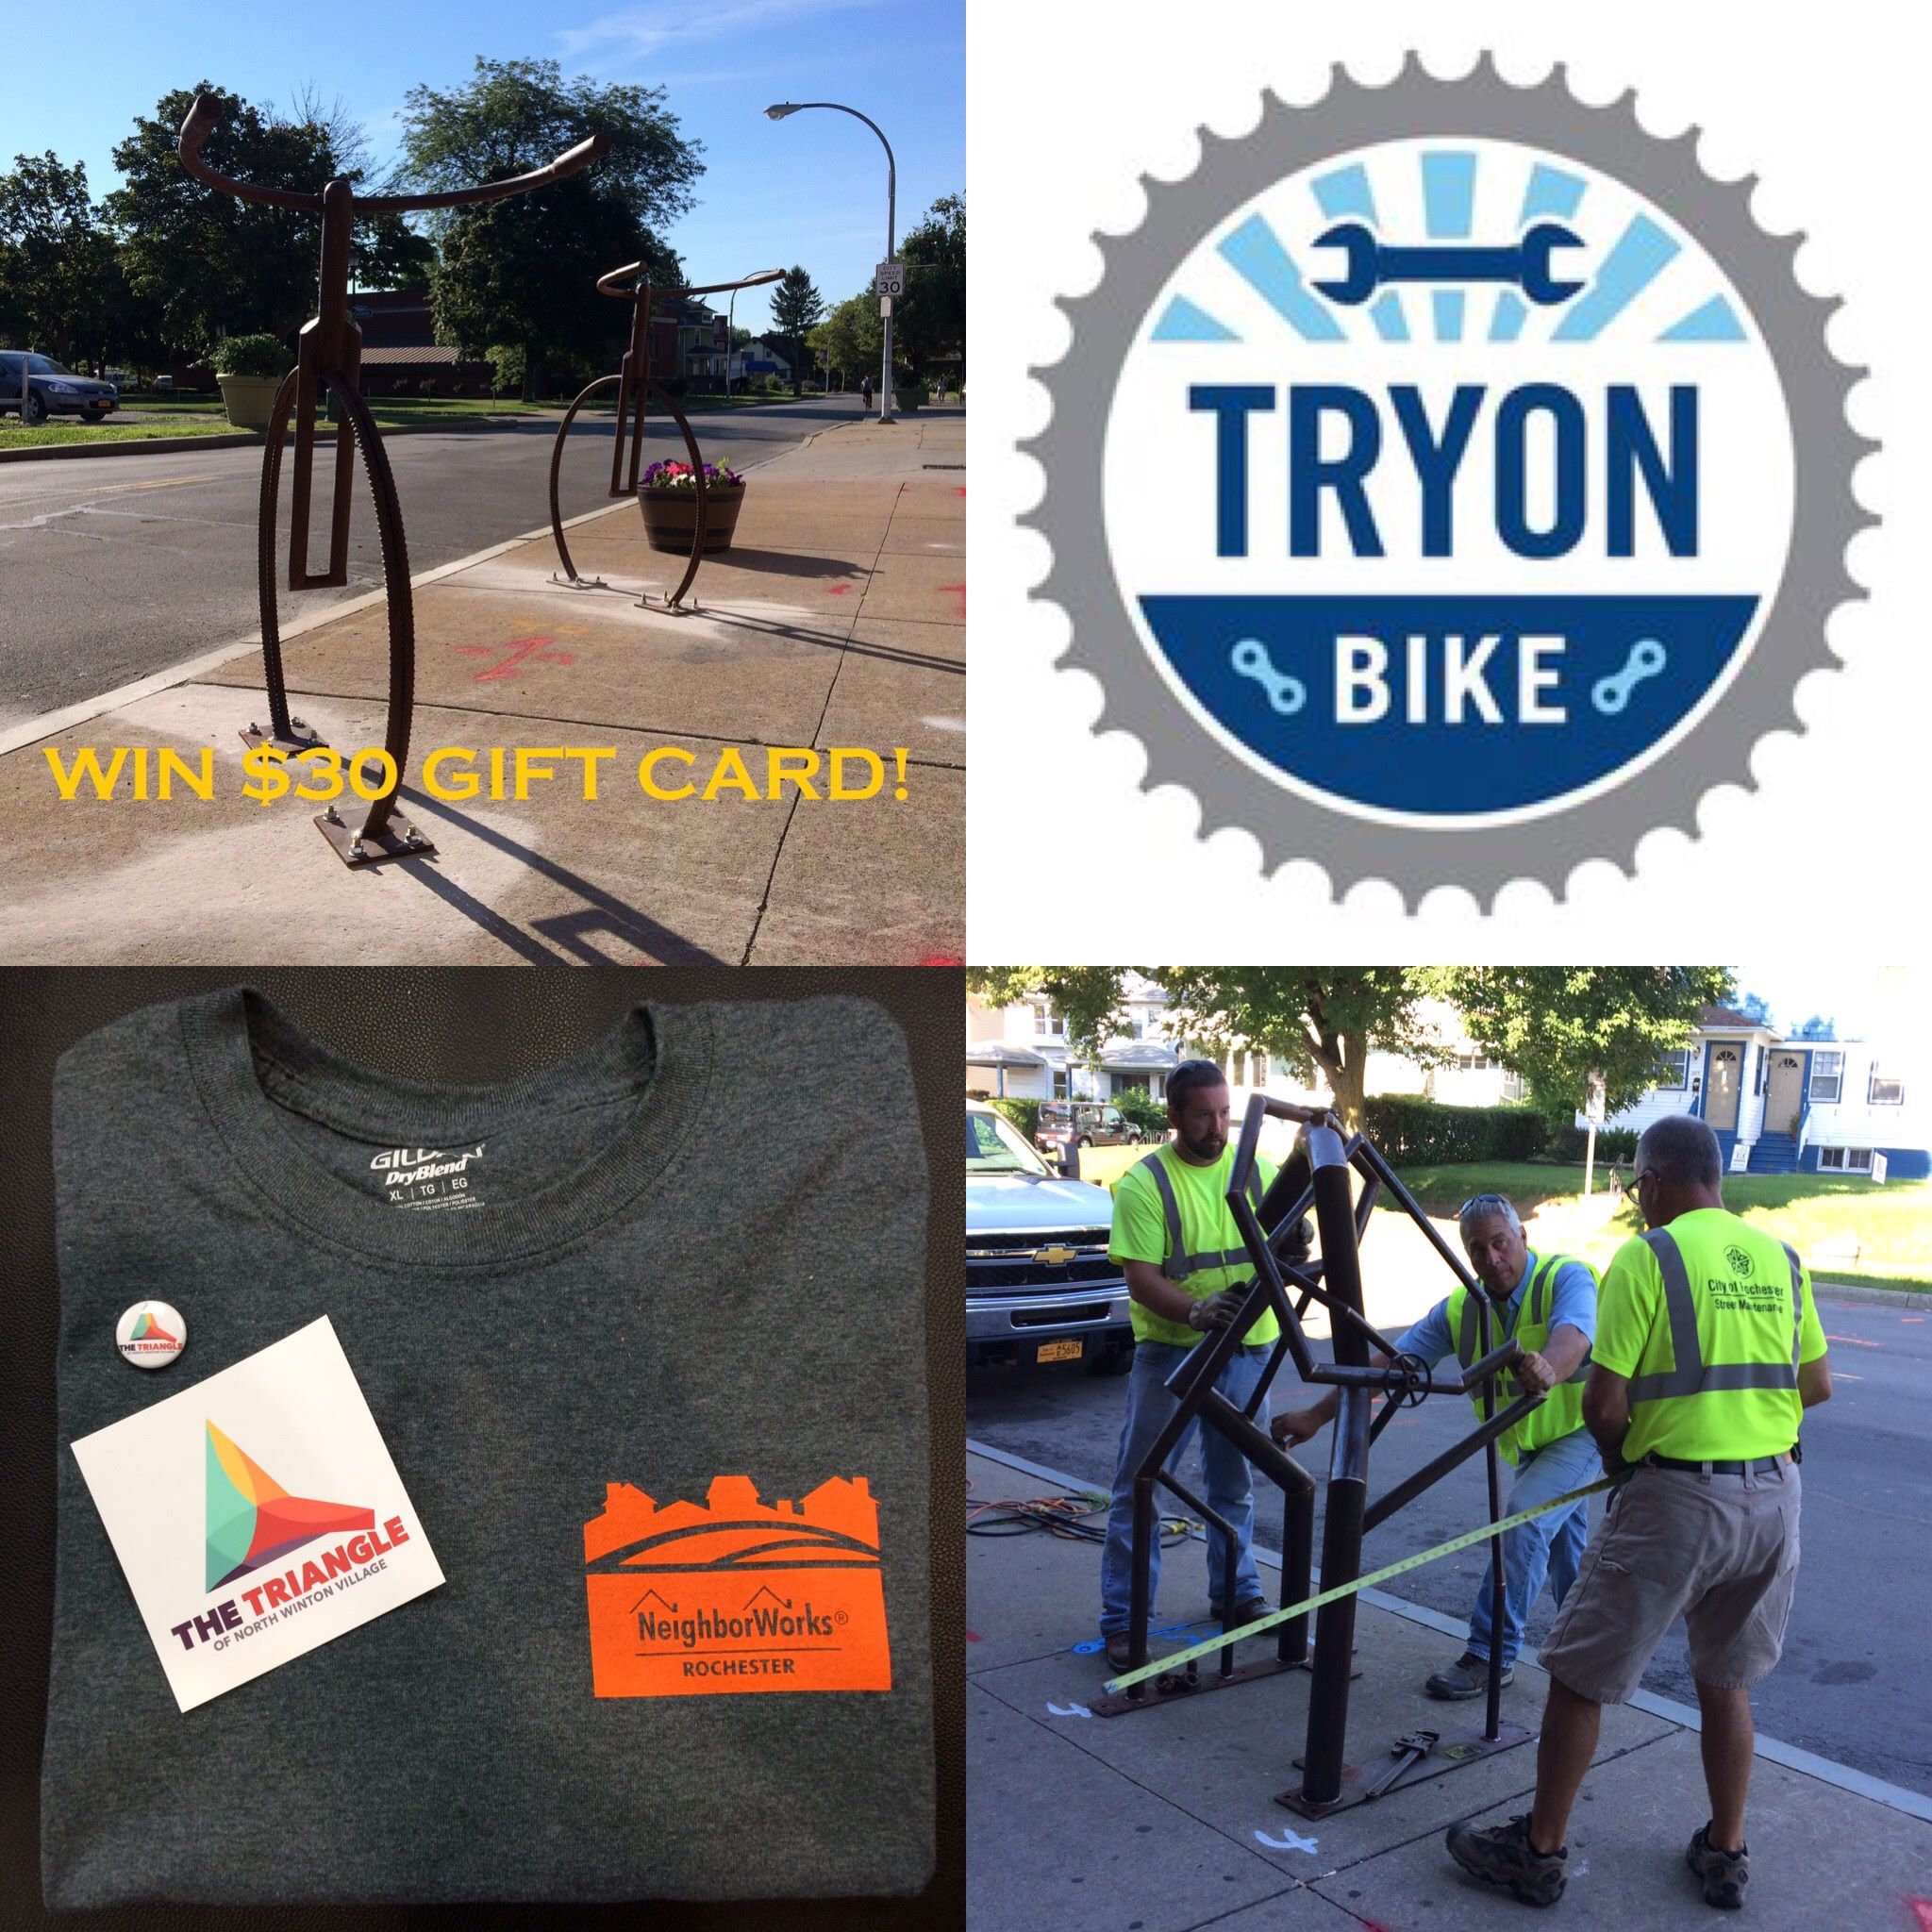 Win a $30 gift card to Tryon Bike. Simply take a picture of yourself and your bike at one of these racks, and upload to Facebook or Instagram.